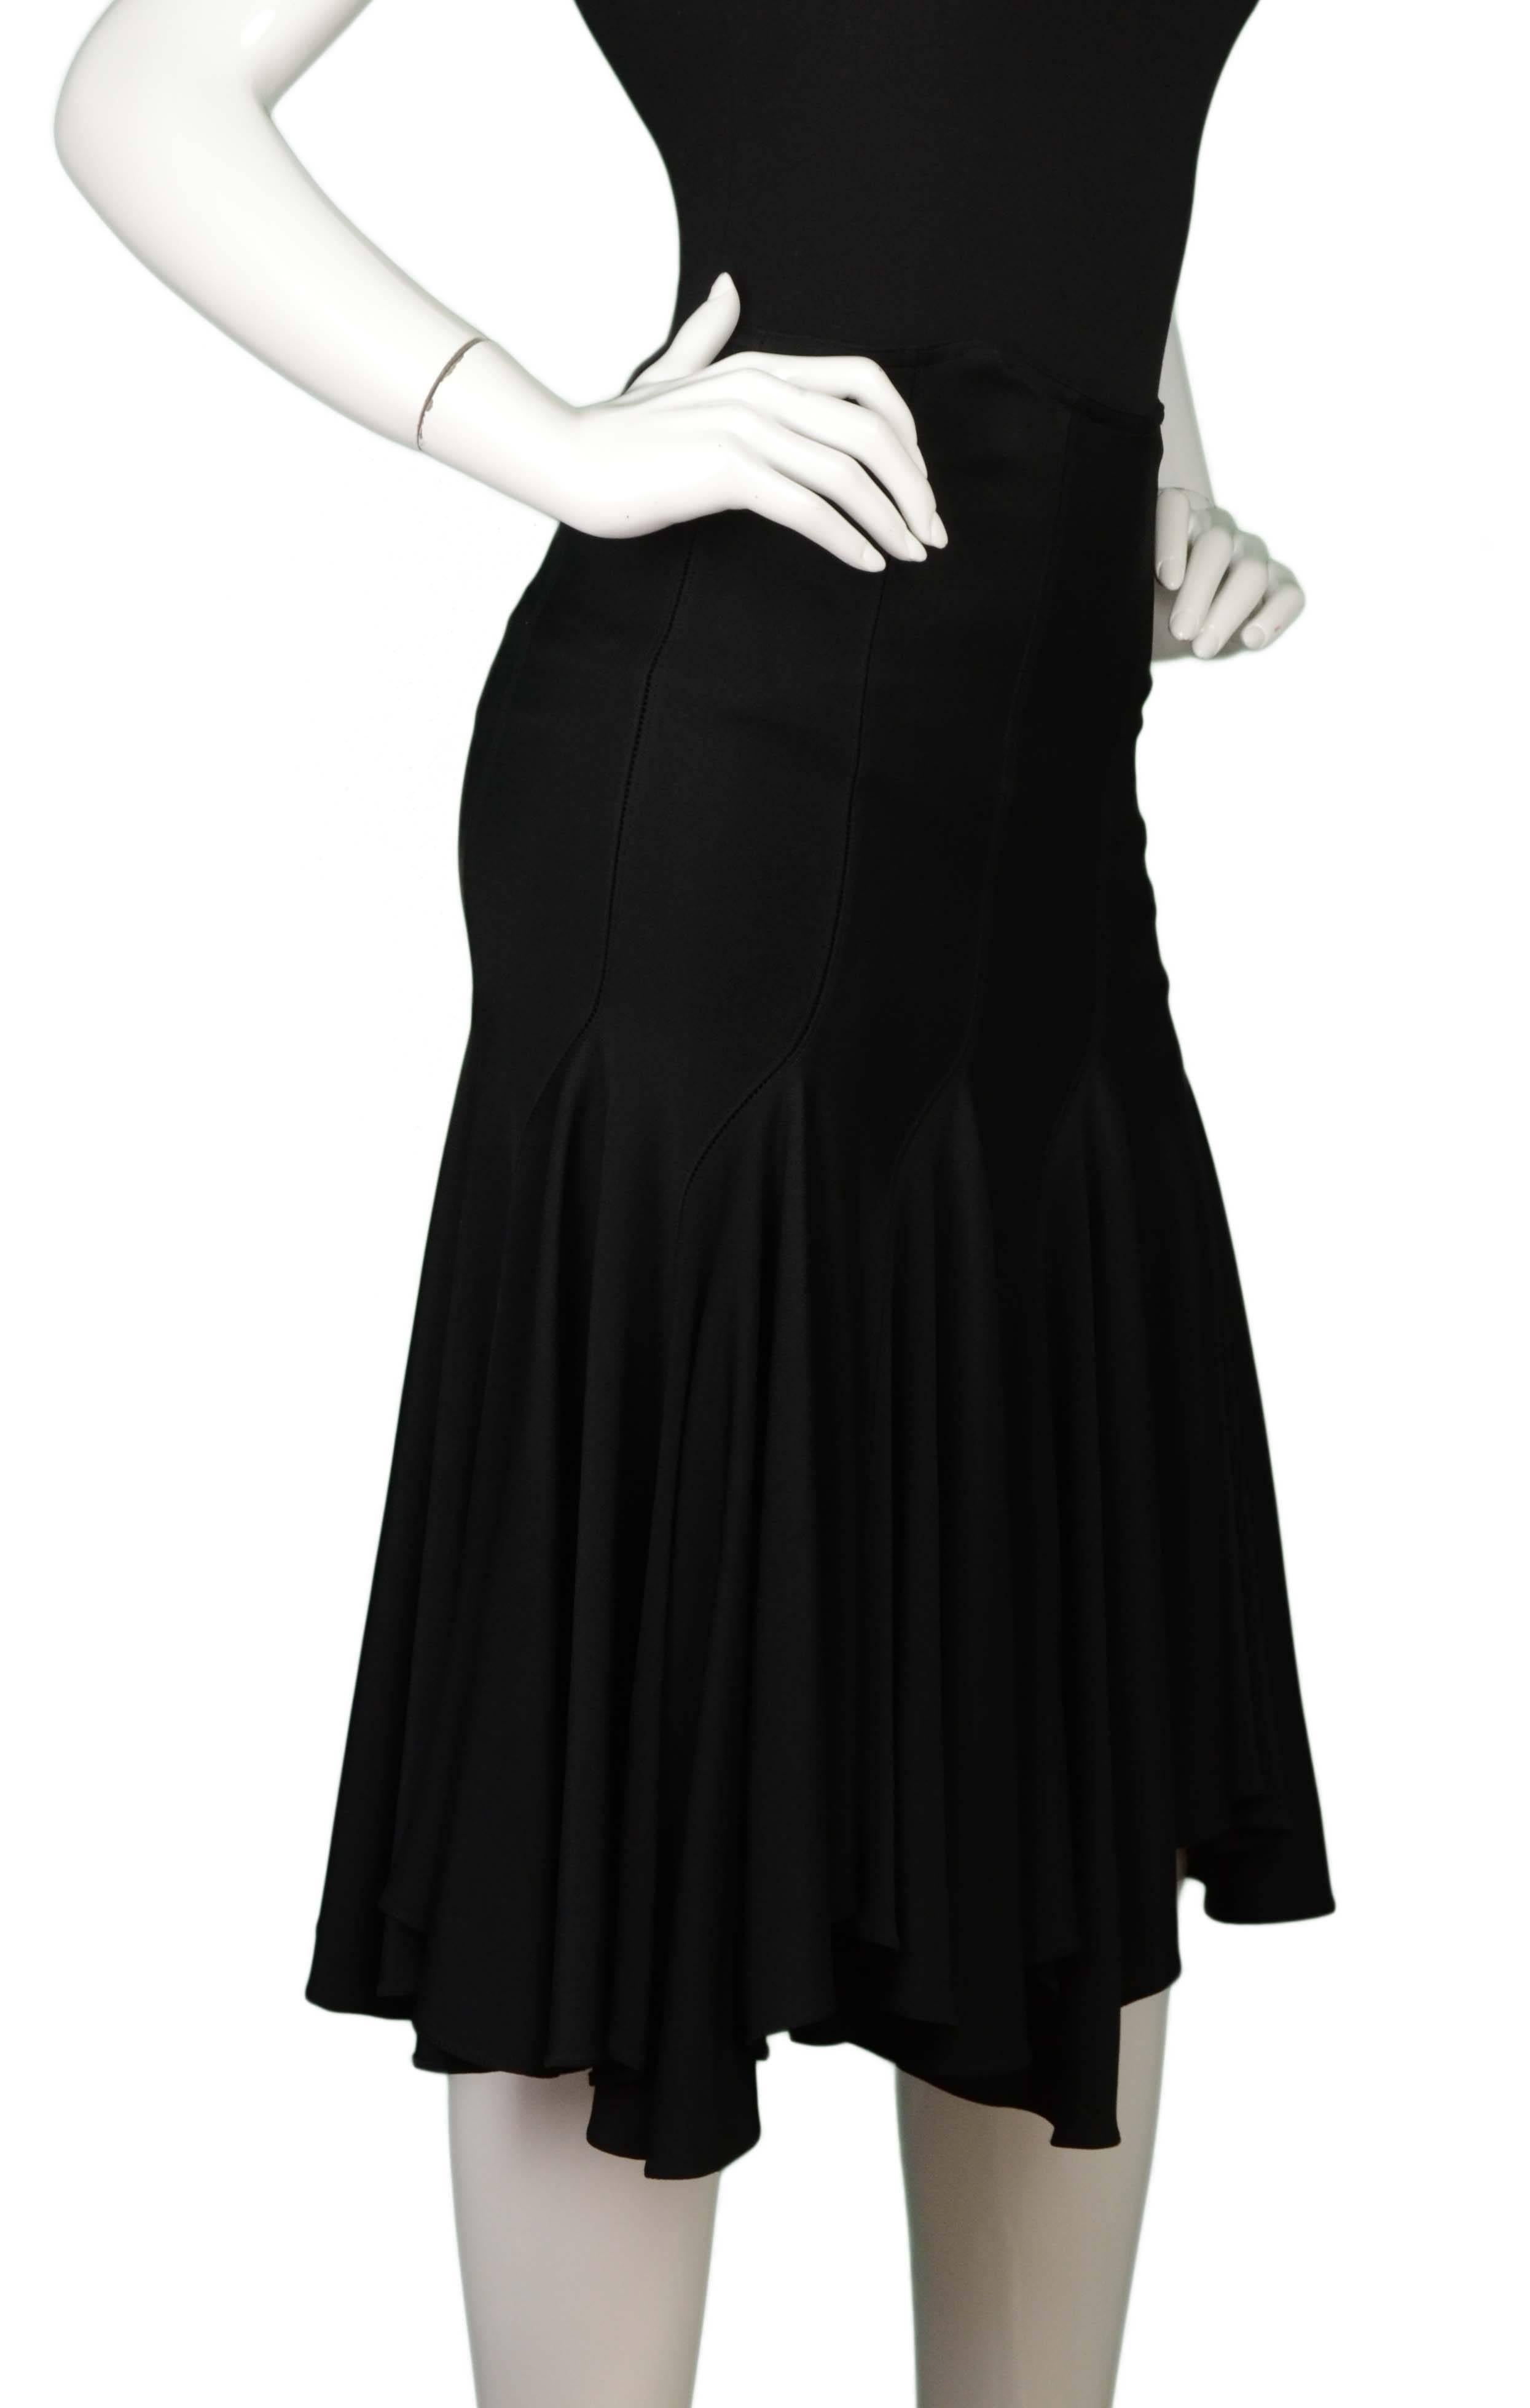 Alaia Black Trumpet Skirt
Features bias cut
Made In: Italy
Color: Black
Composition: 100% viscose
Lining: None
Closure/Opening: Back center zipper with hook and eye closure
Exterior Pockets: None
Interior Pockets: None
Overall Condition: